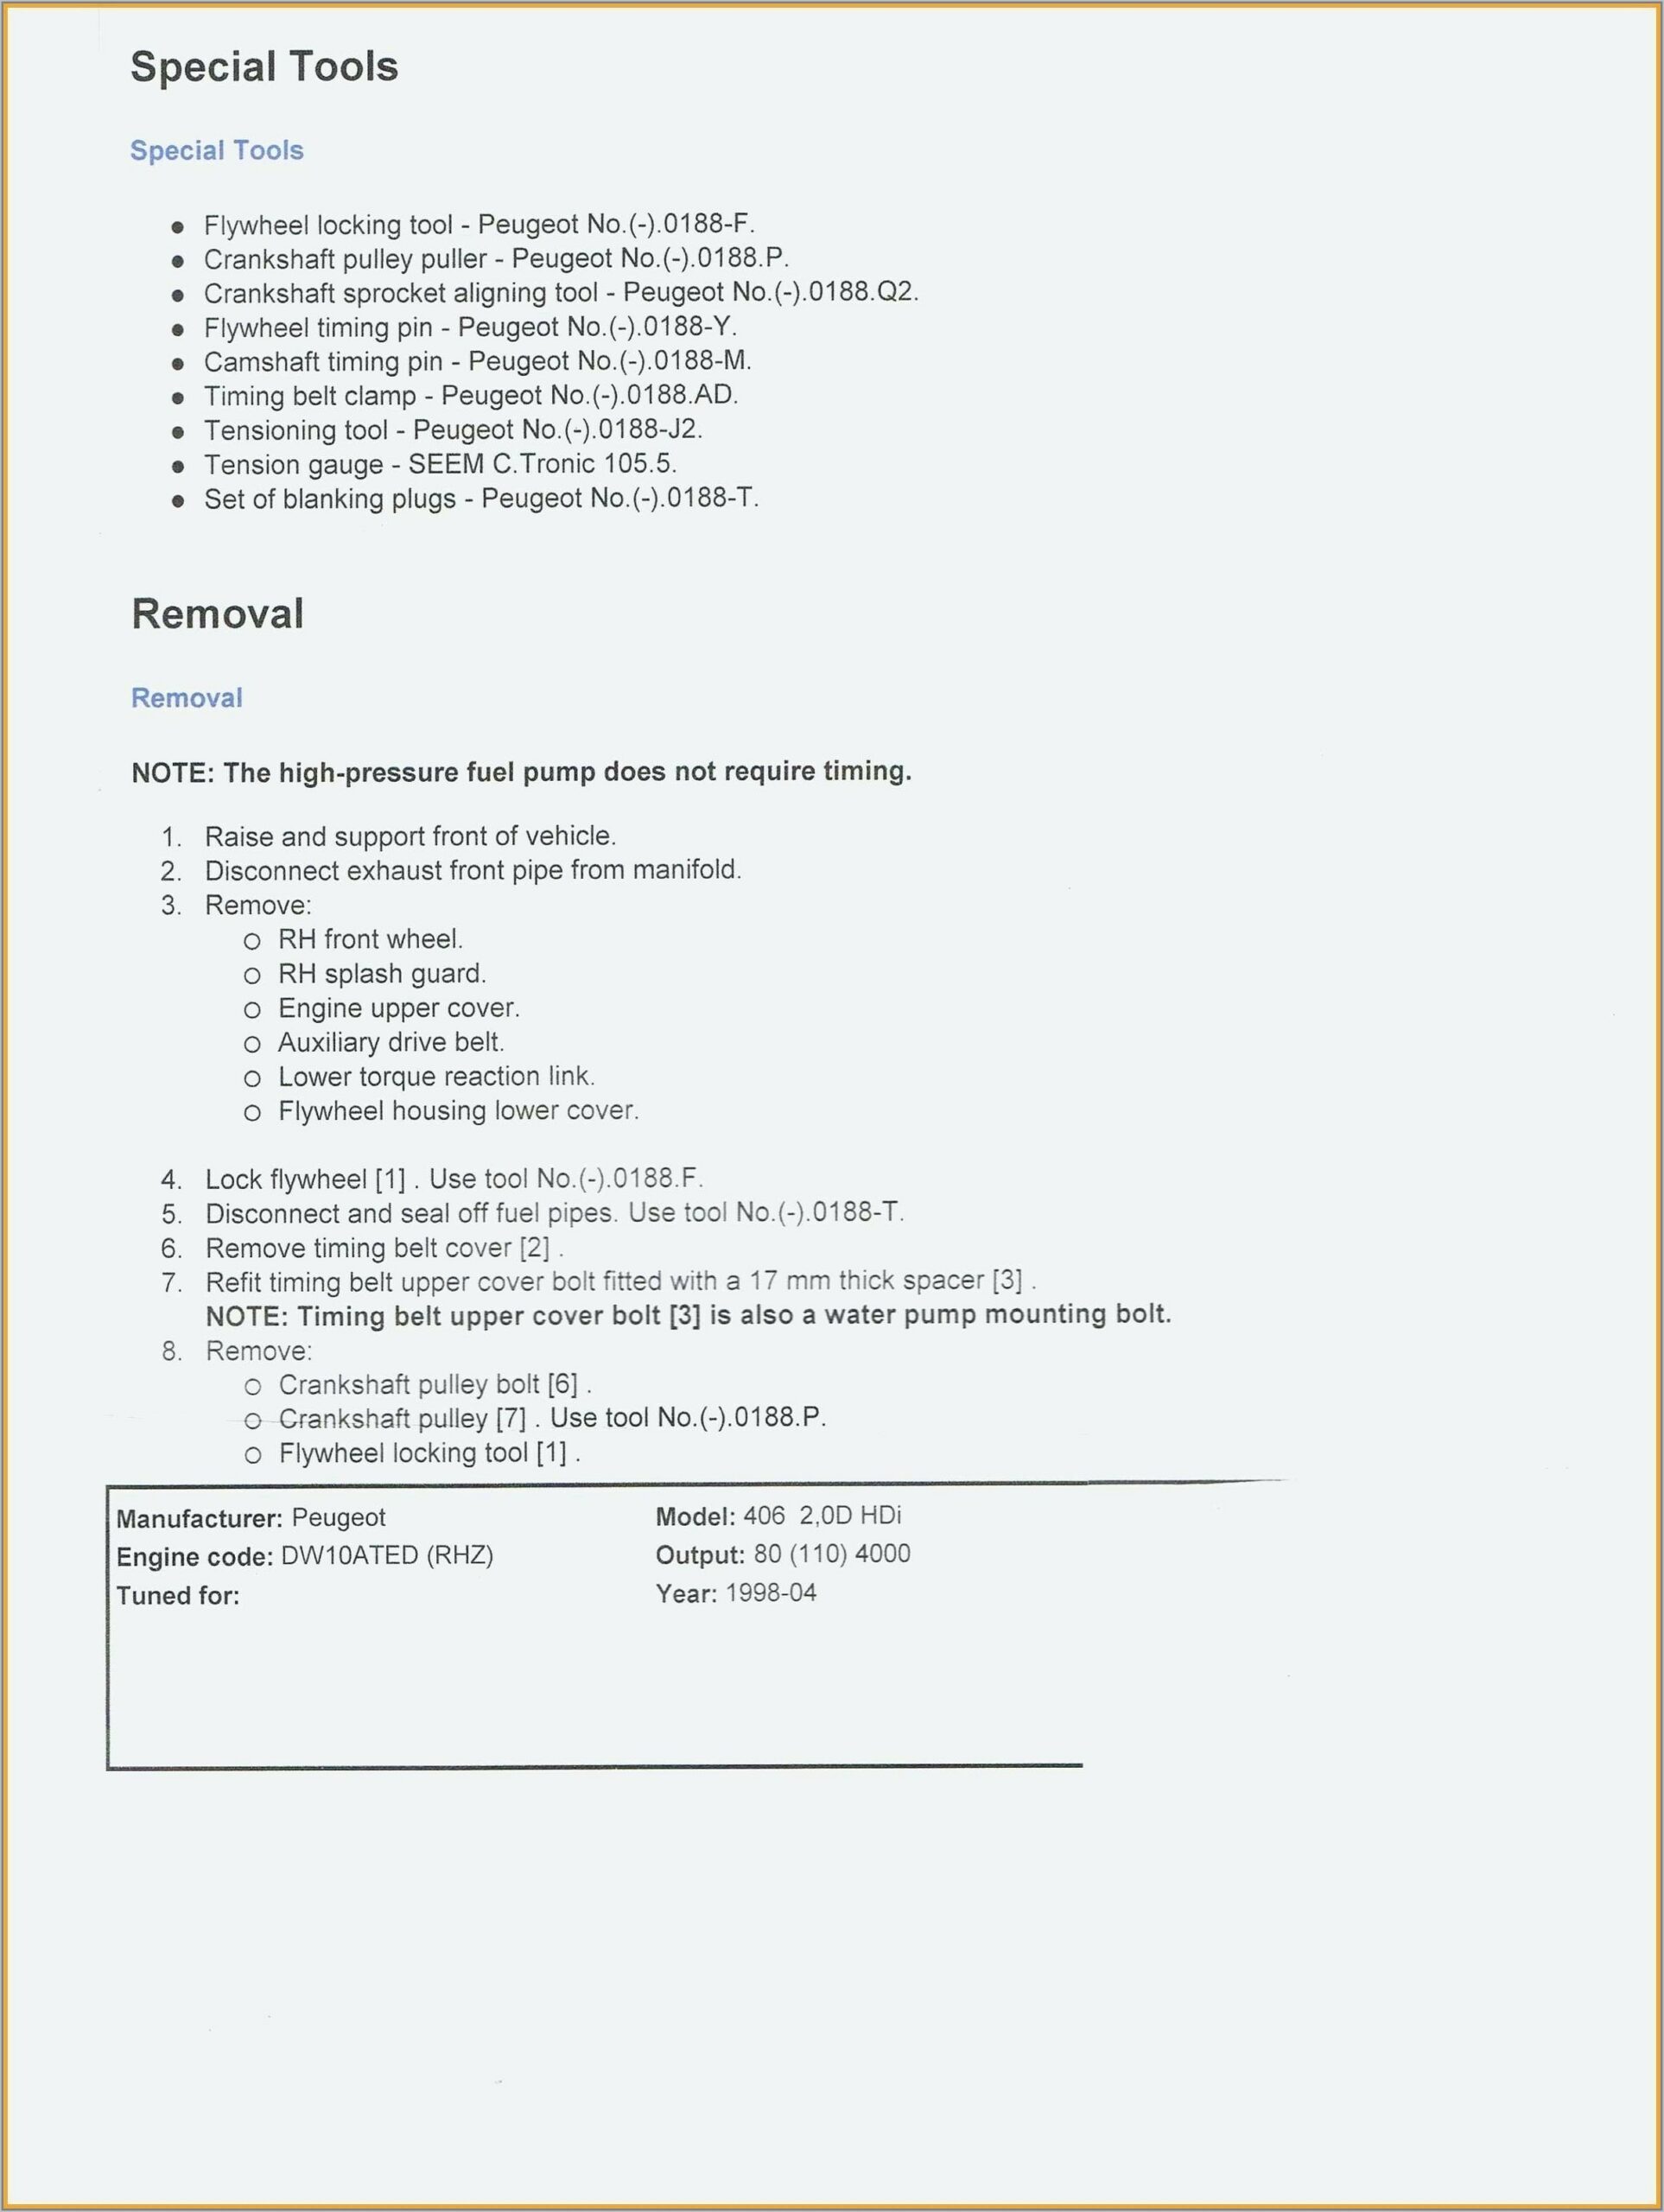 Electrical Commissioning Engineer Resume Format